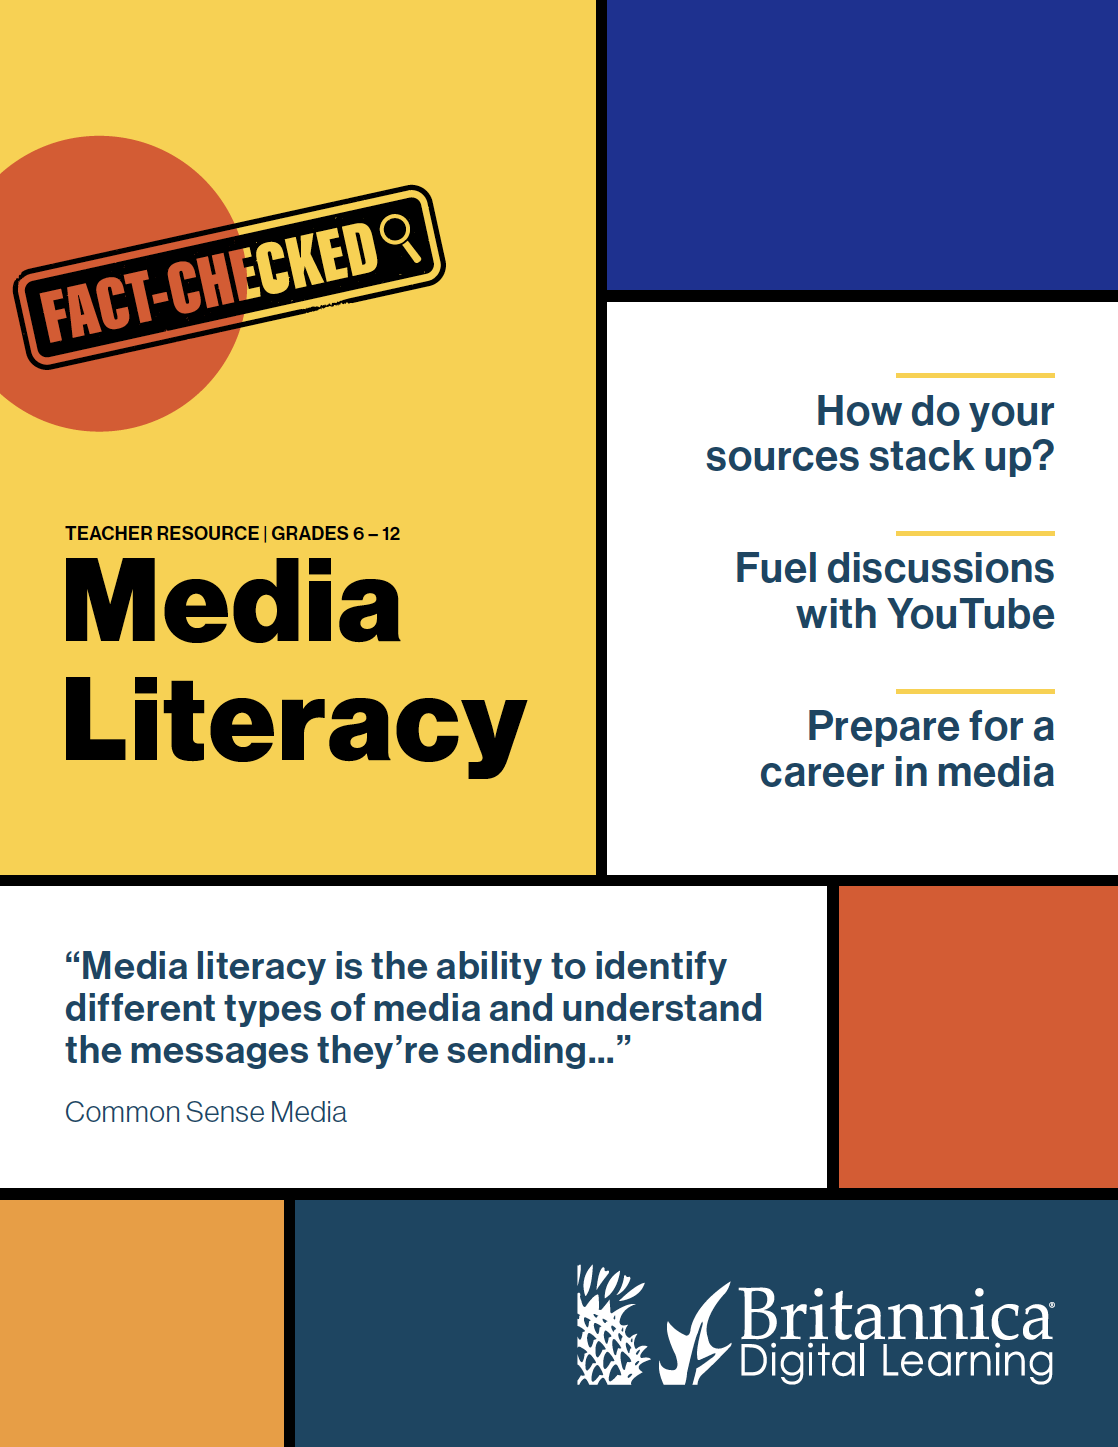 why is media literacy important essay